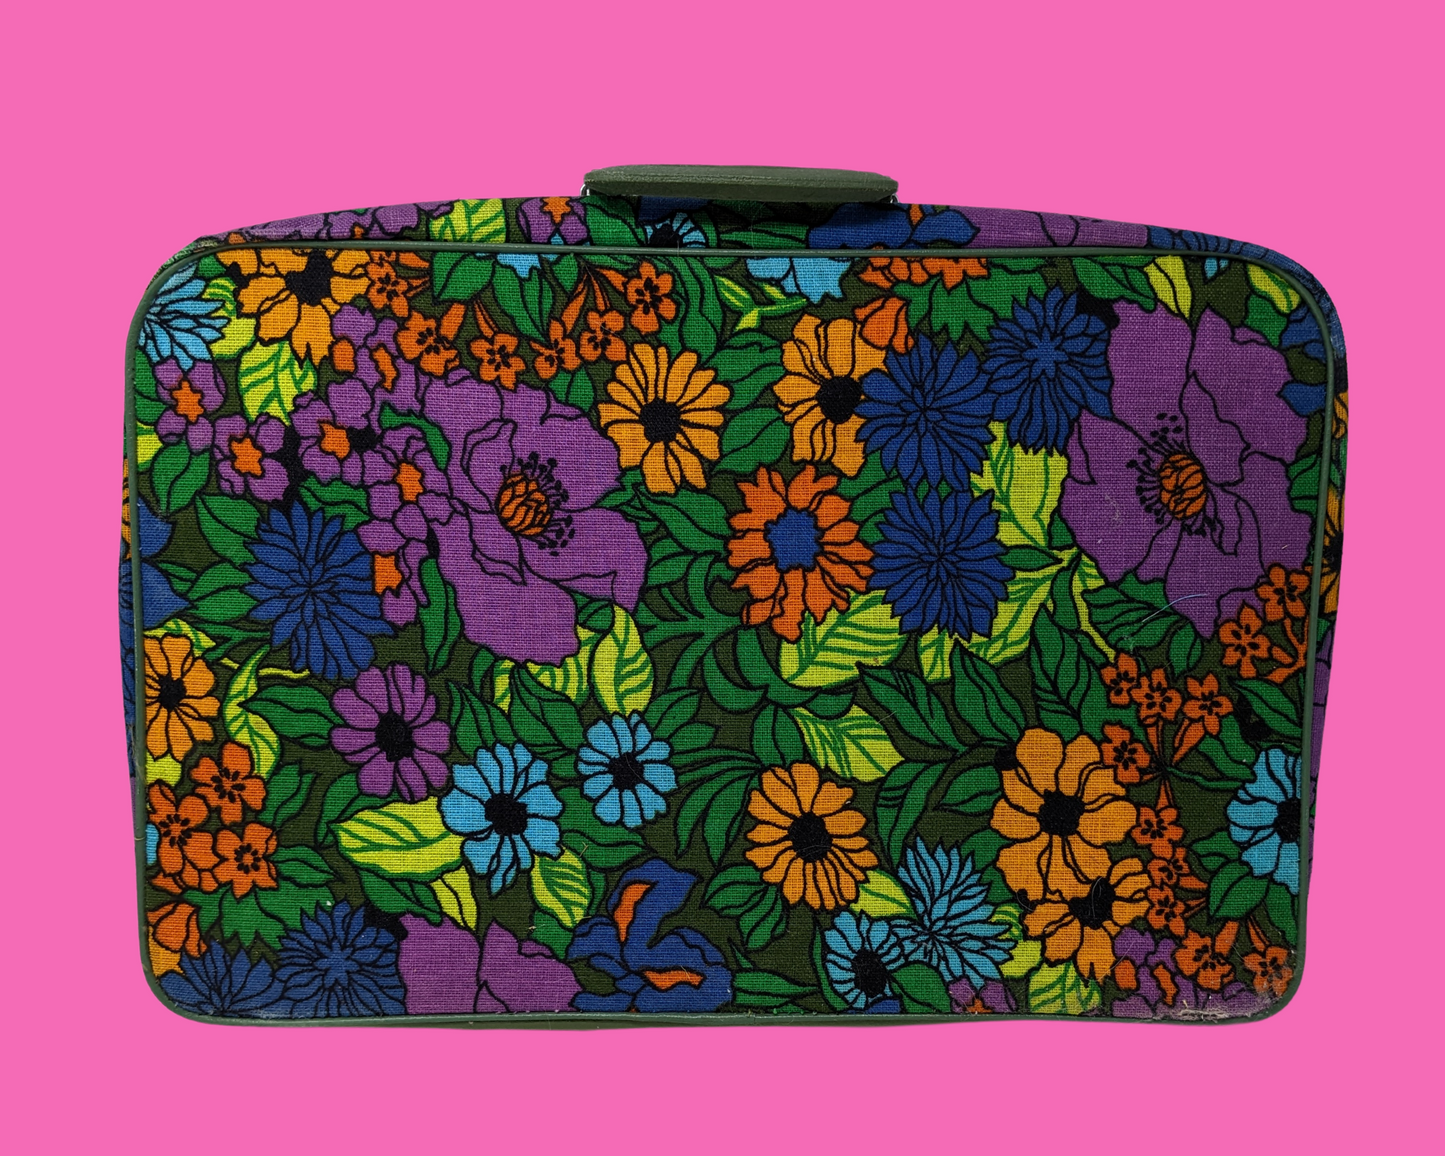 Vintage 1960's Blue, Yellow, Green and Purple Floral Groovy Small Suitcase